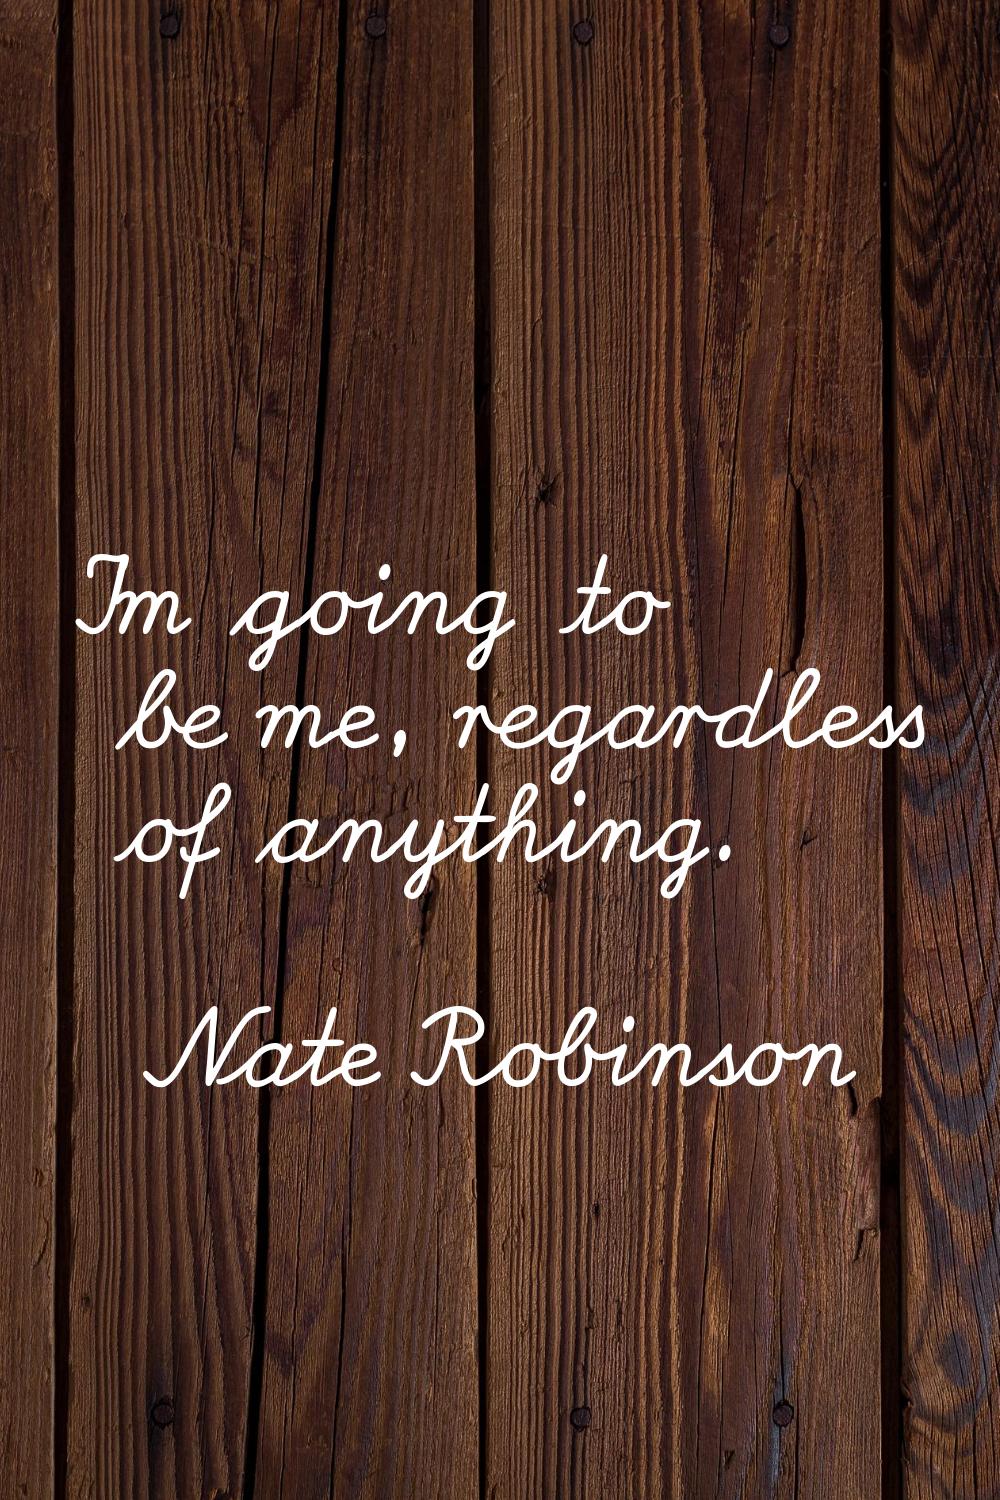 I'm going to be me, regardless of anything.